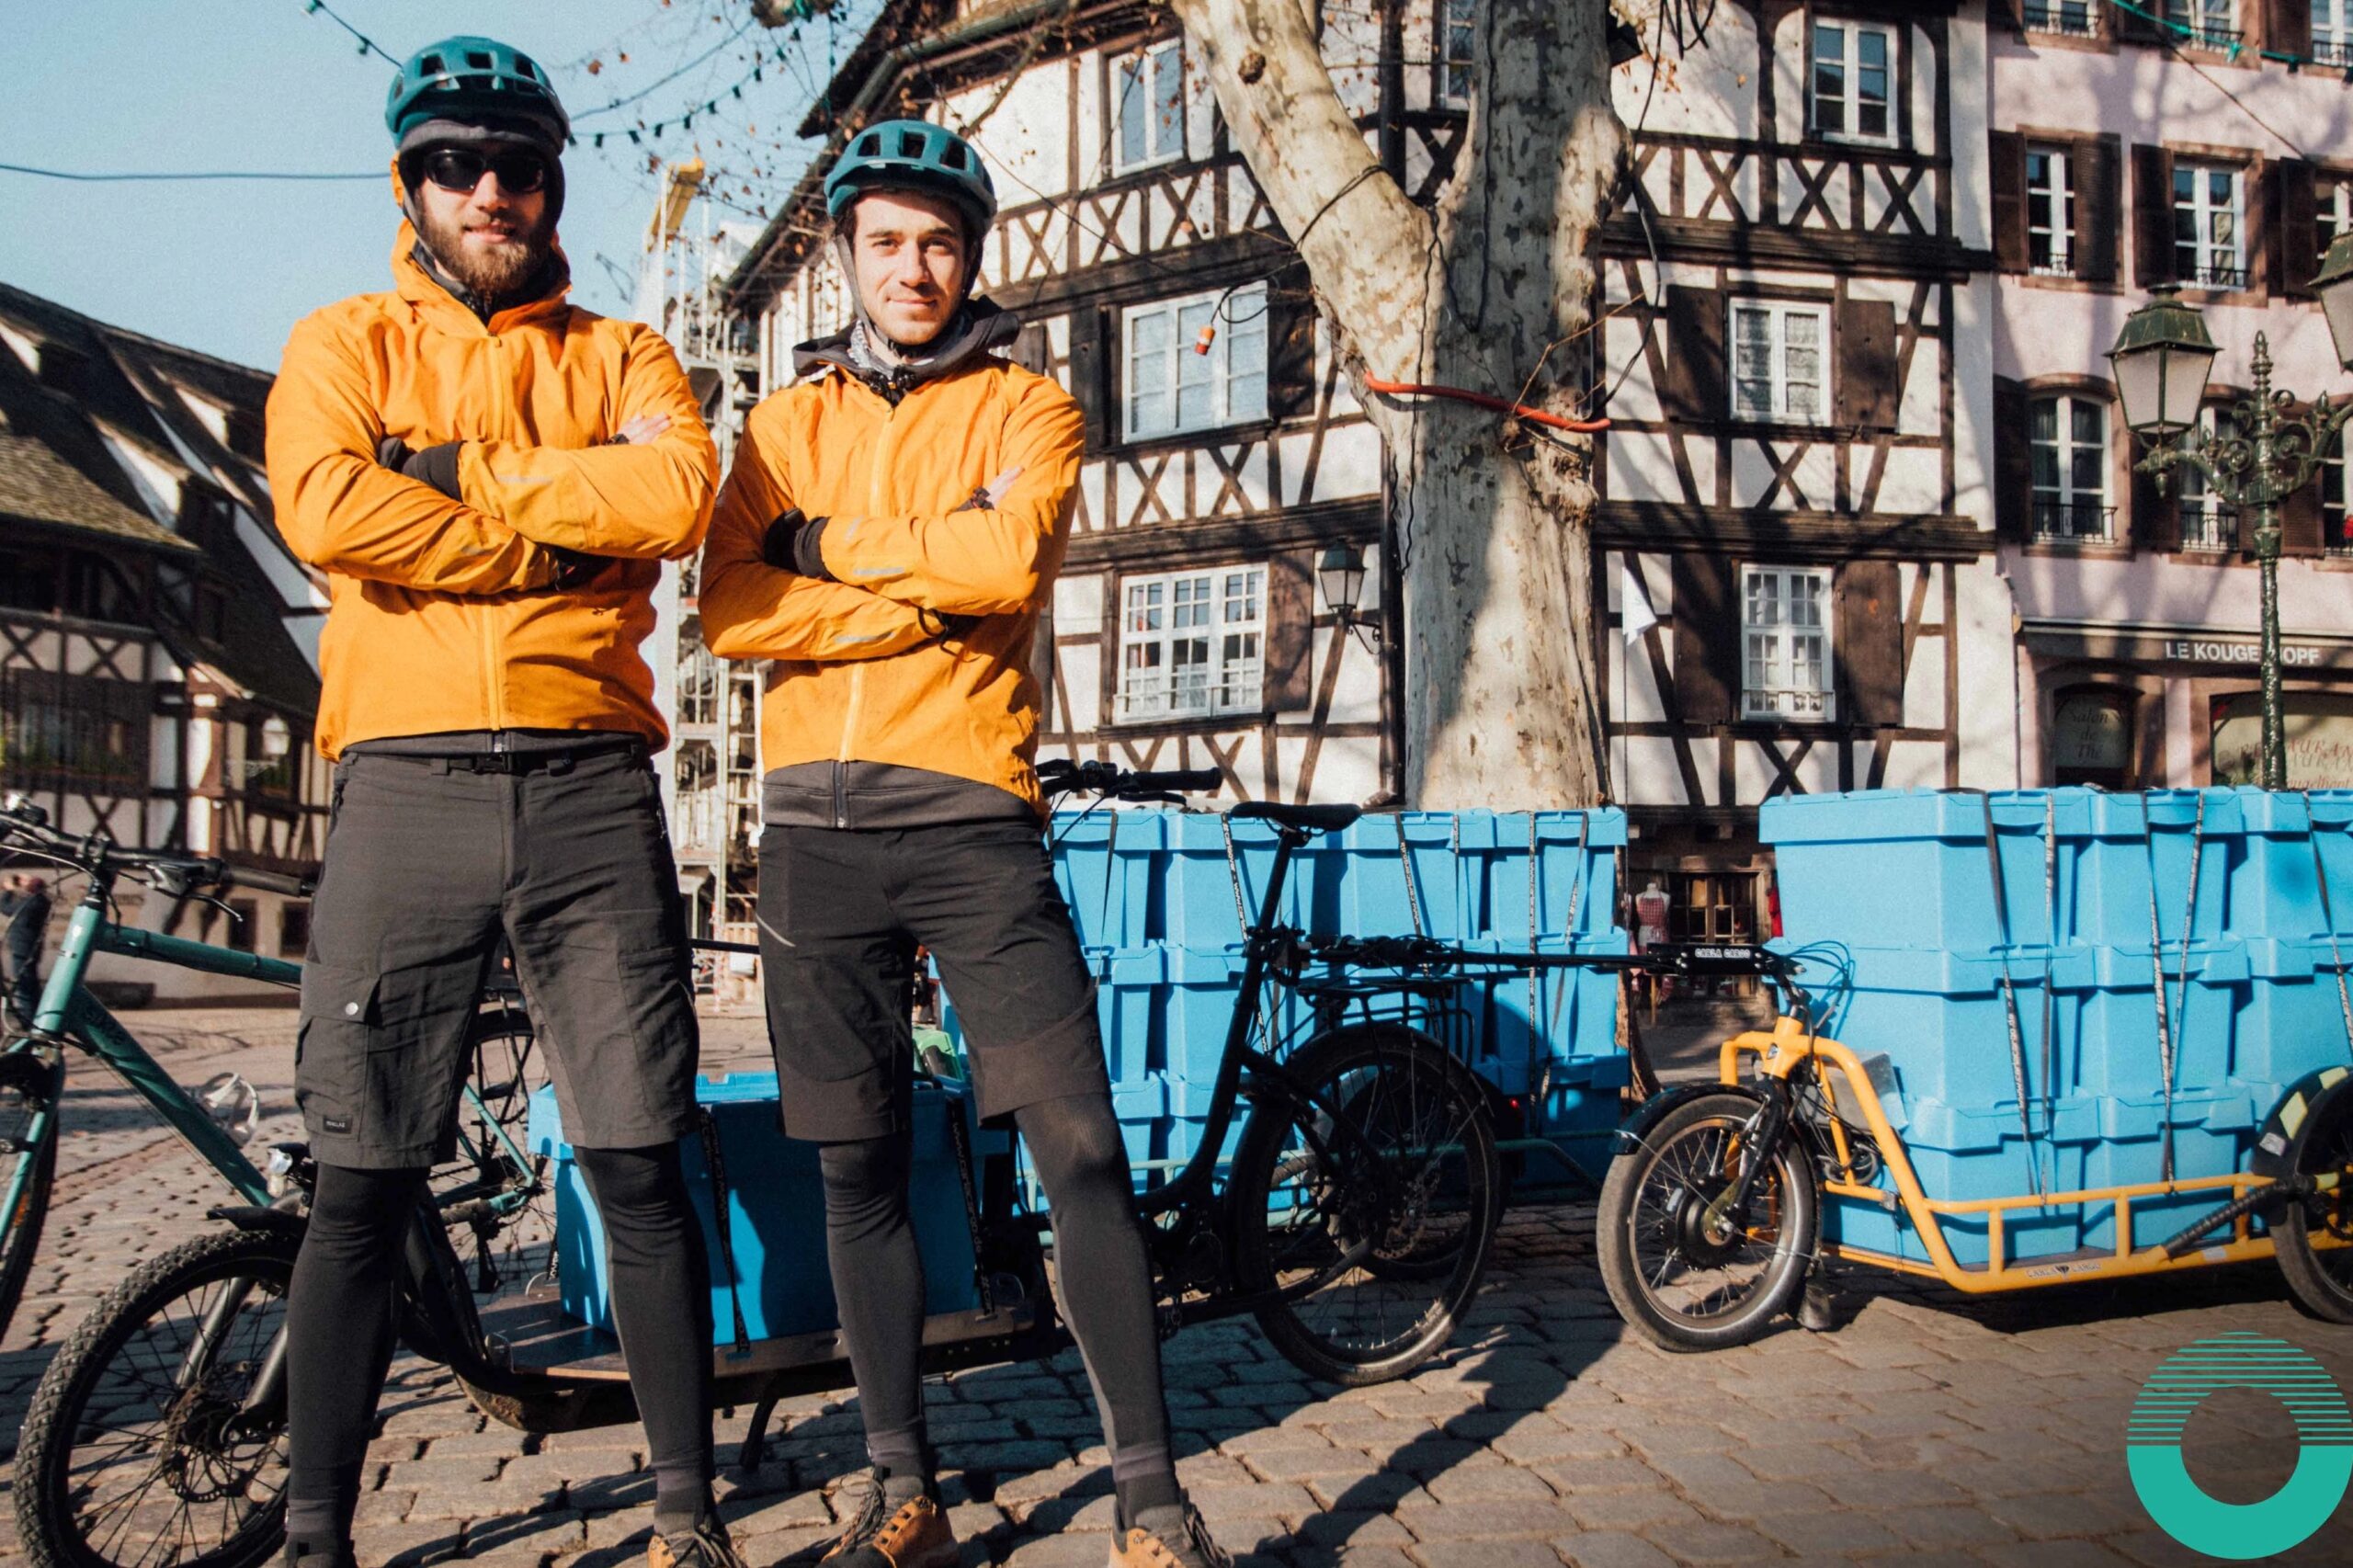 SIKLE collects organic waste from professionals in Strasbourg by bicycle.